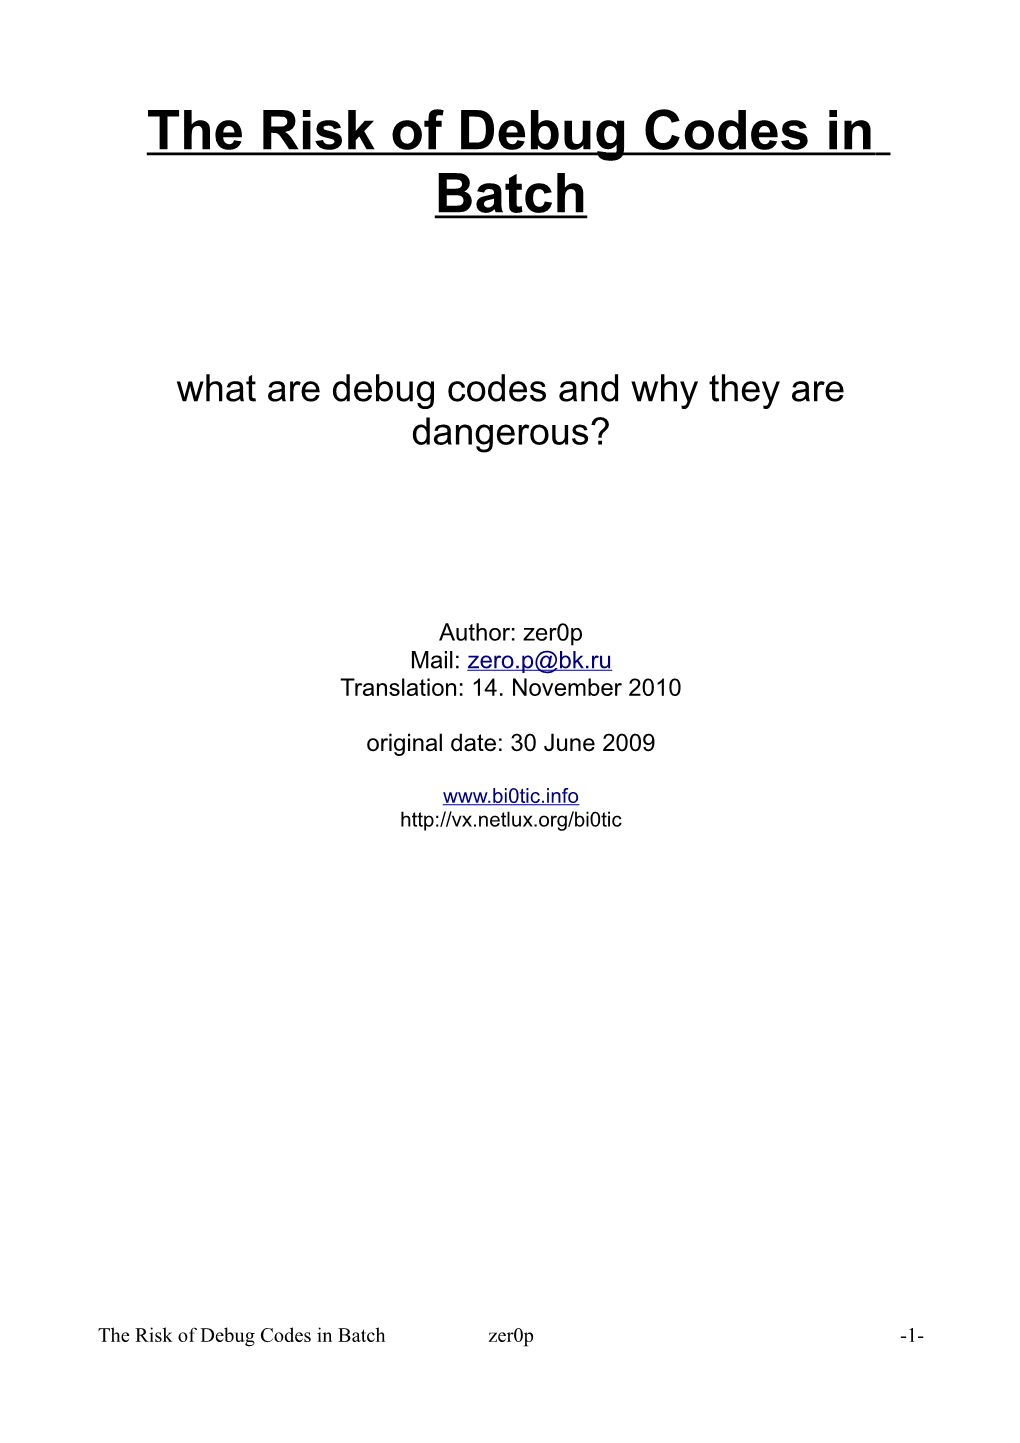 The Risk of Debug Codes in Batch